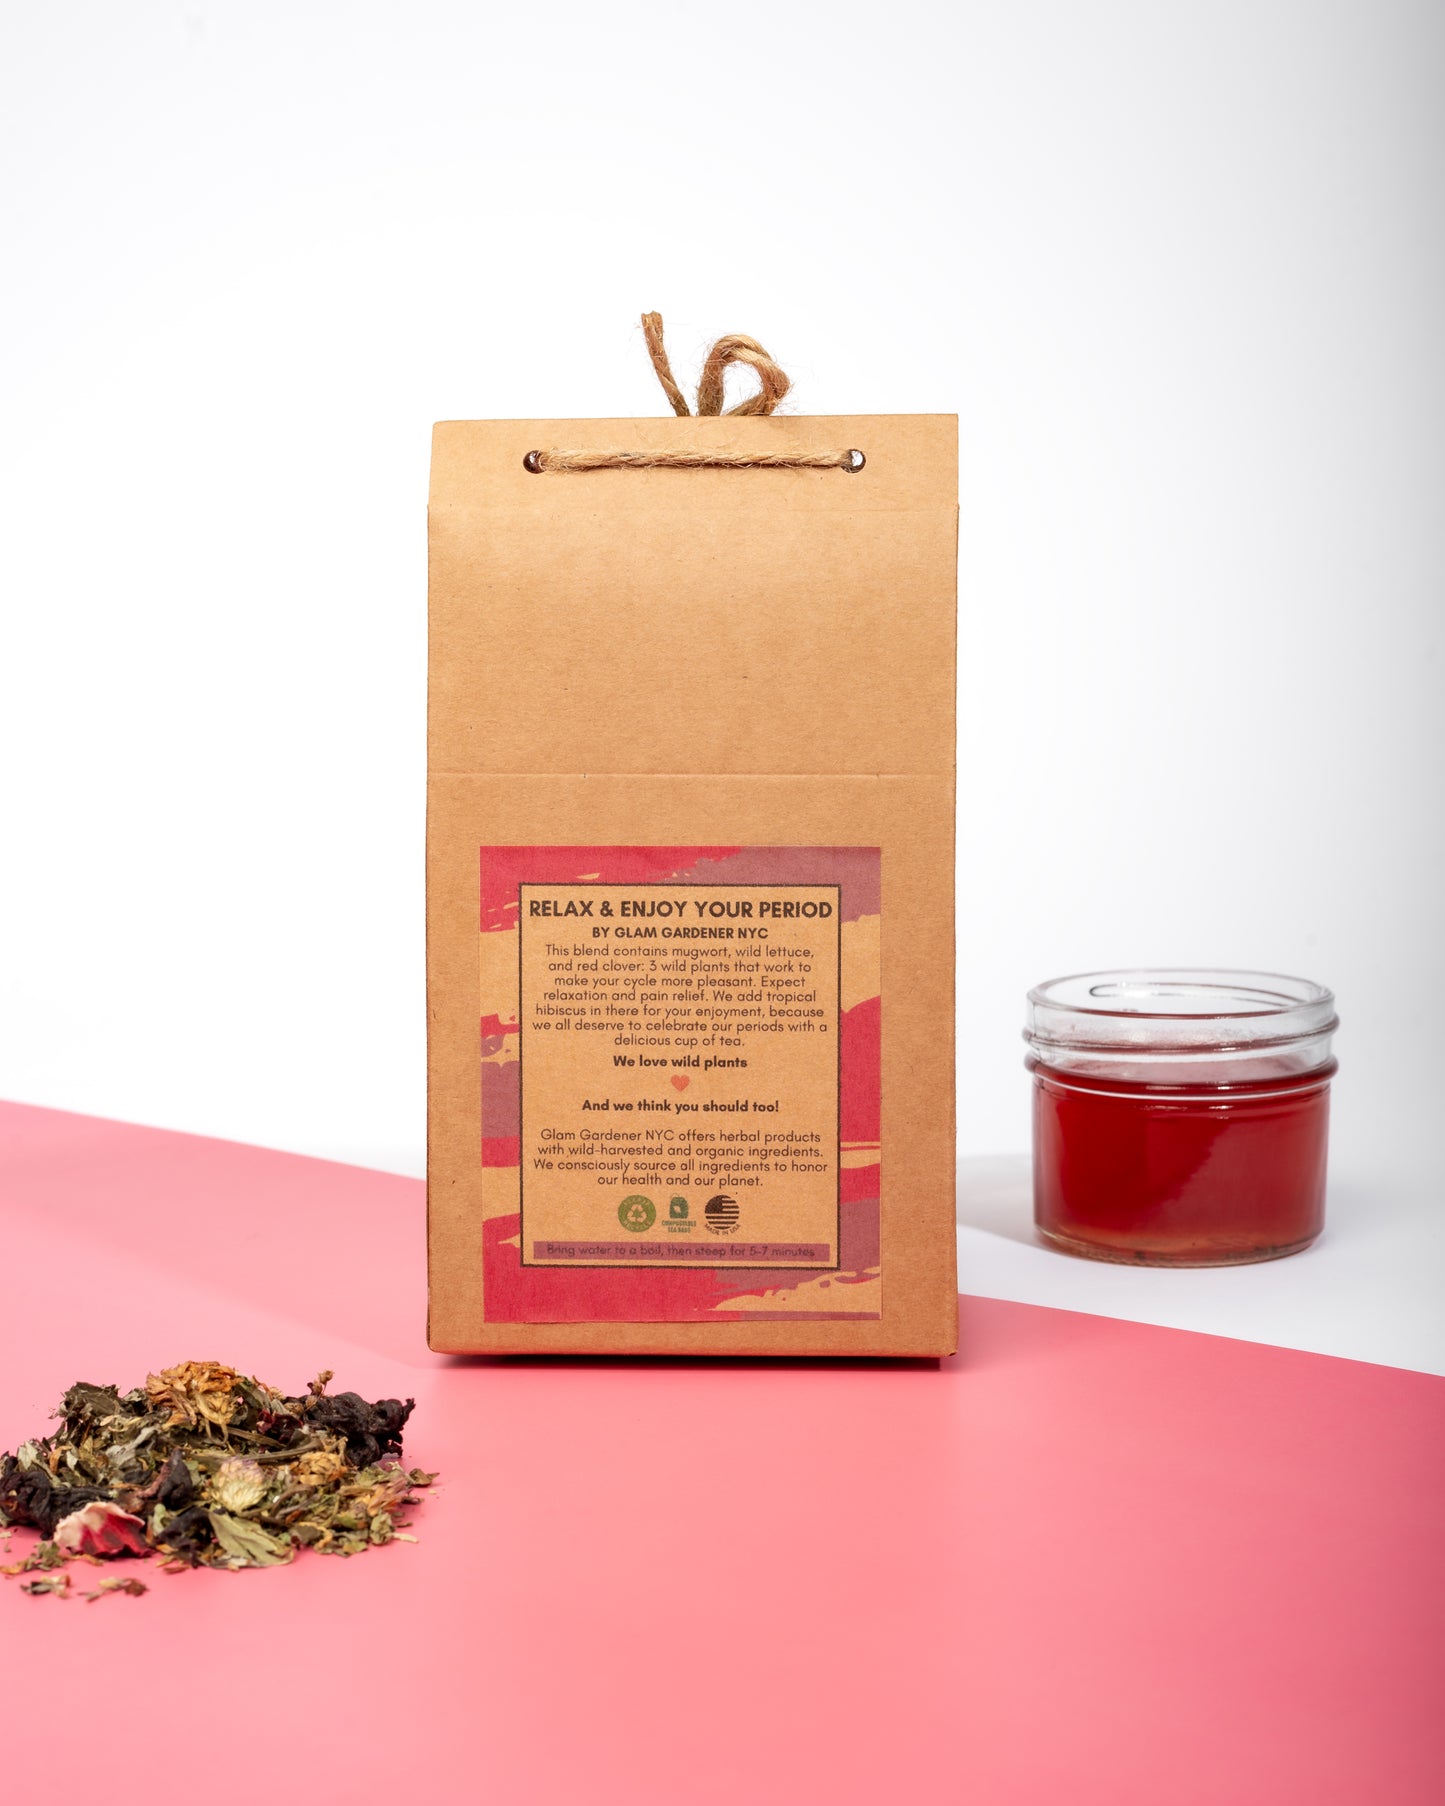 Relax and enjoy your period bagged herbal tea (designed for menstrual symptoms)